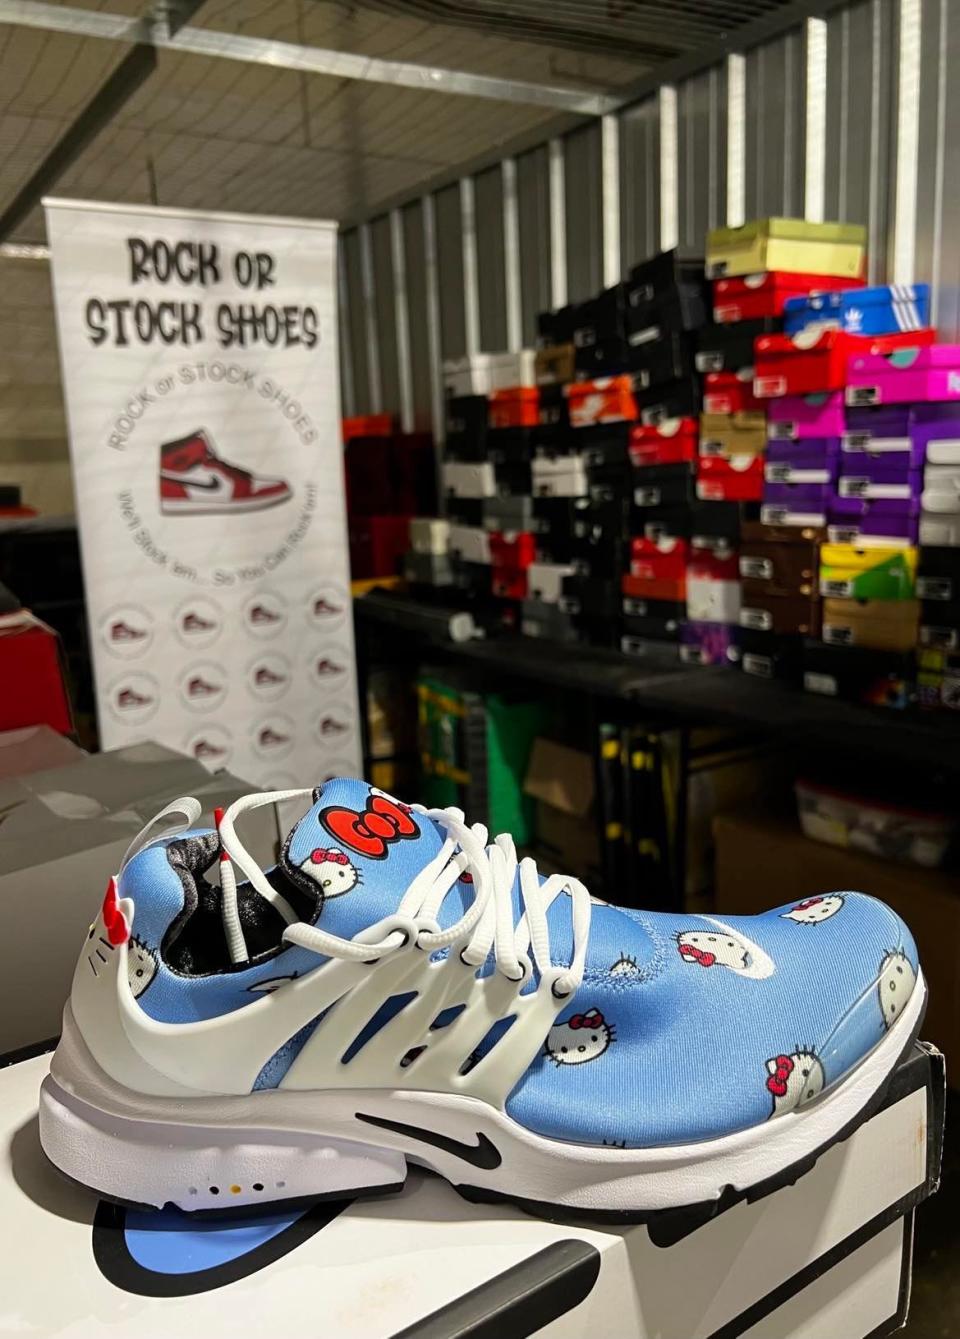 This "Hello Kitty" Nike athletic shoe is among the thousands of sneakers that will be for sale at the Stark County Sneaker and Clothing XPO on Sunday at the Canton Memorial Civic Center.